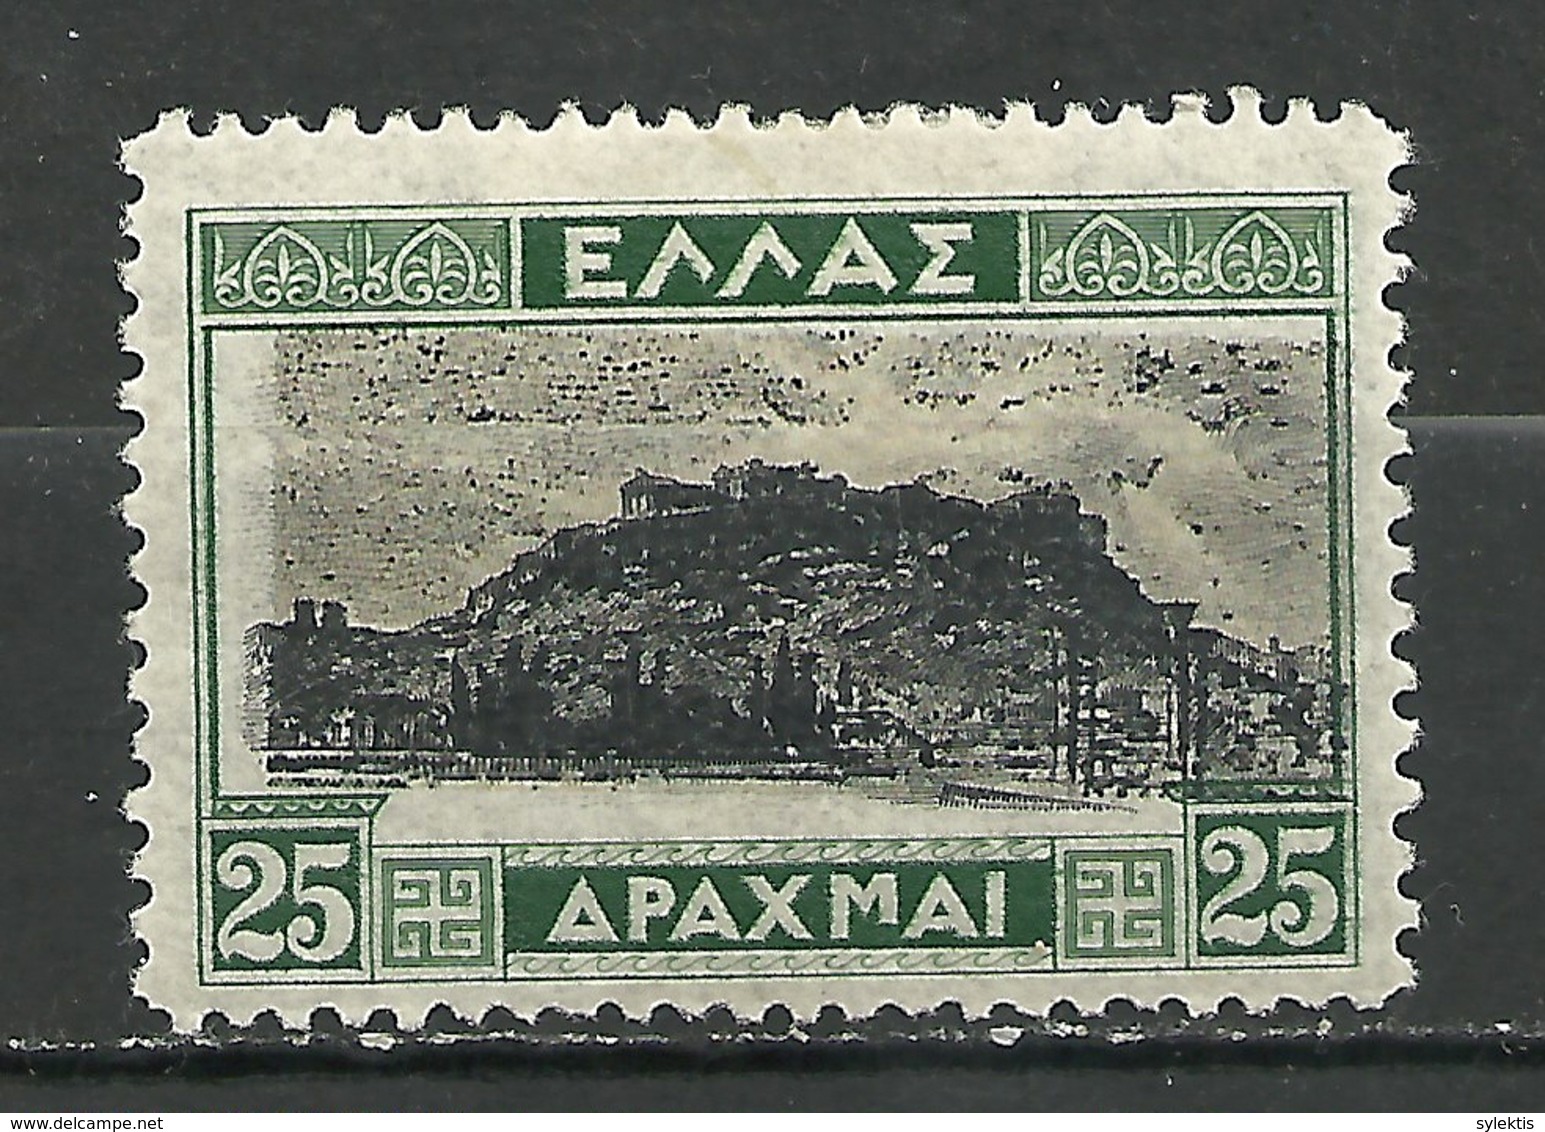 GREECE 1927 LANDSCAPES 25 DRX STAMPS DOUBLE CENTRE MH - Errors, Freaks & Oddities (EFO)